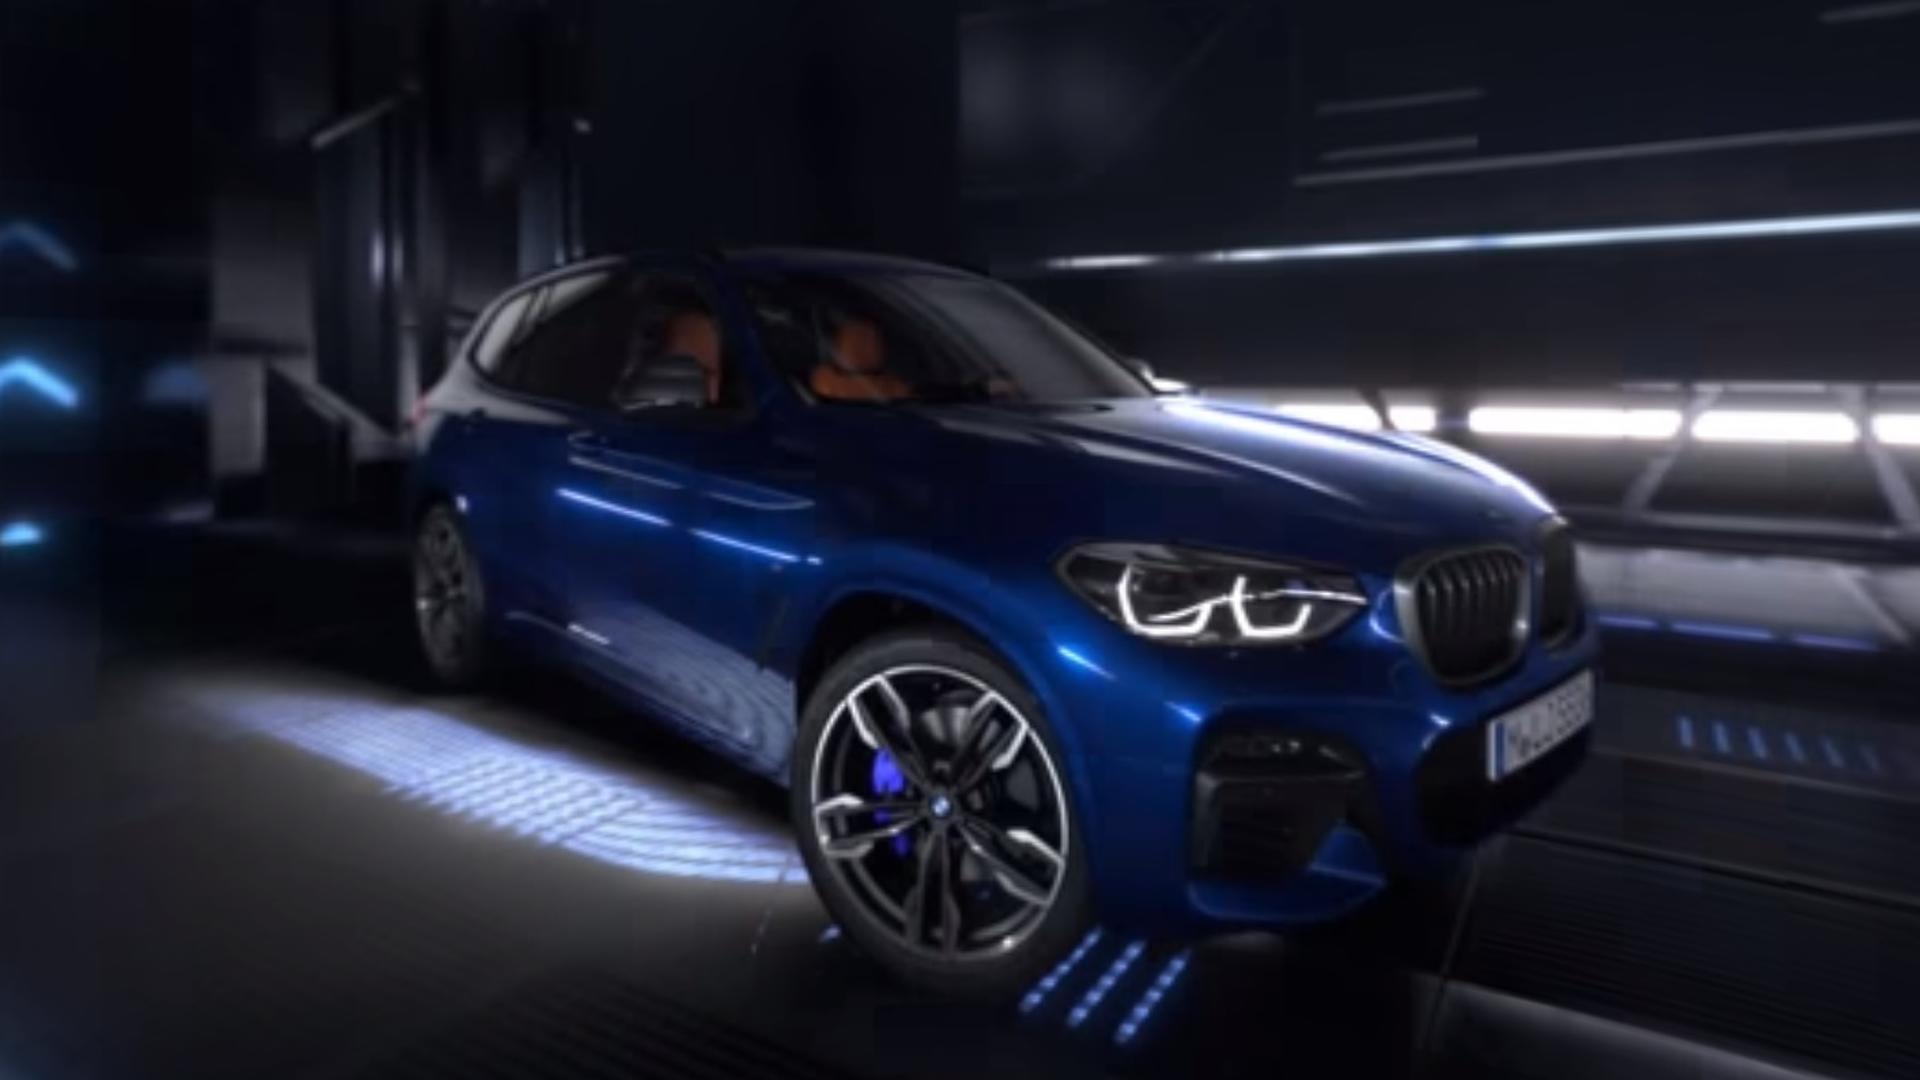 Take A Virtual Test Drive On Mars With The 2018 Bmw X3 Wallpaper Of